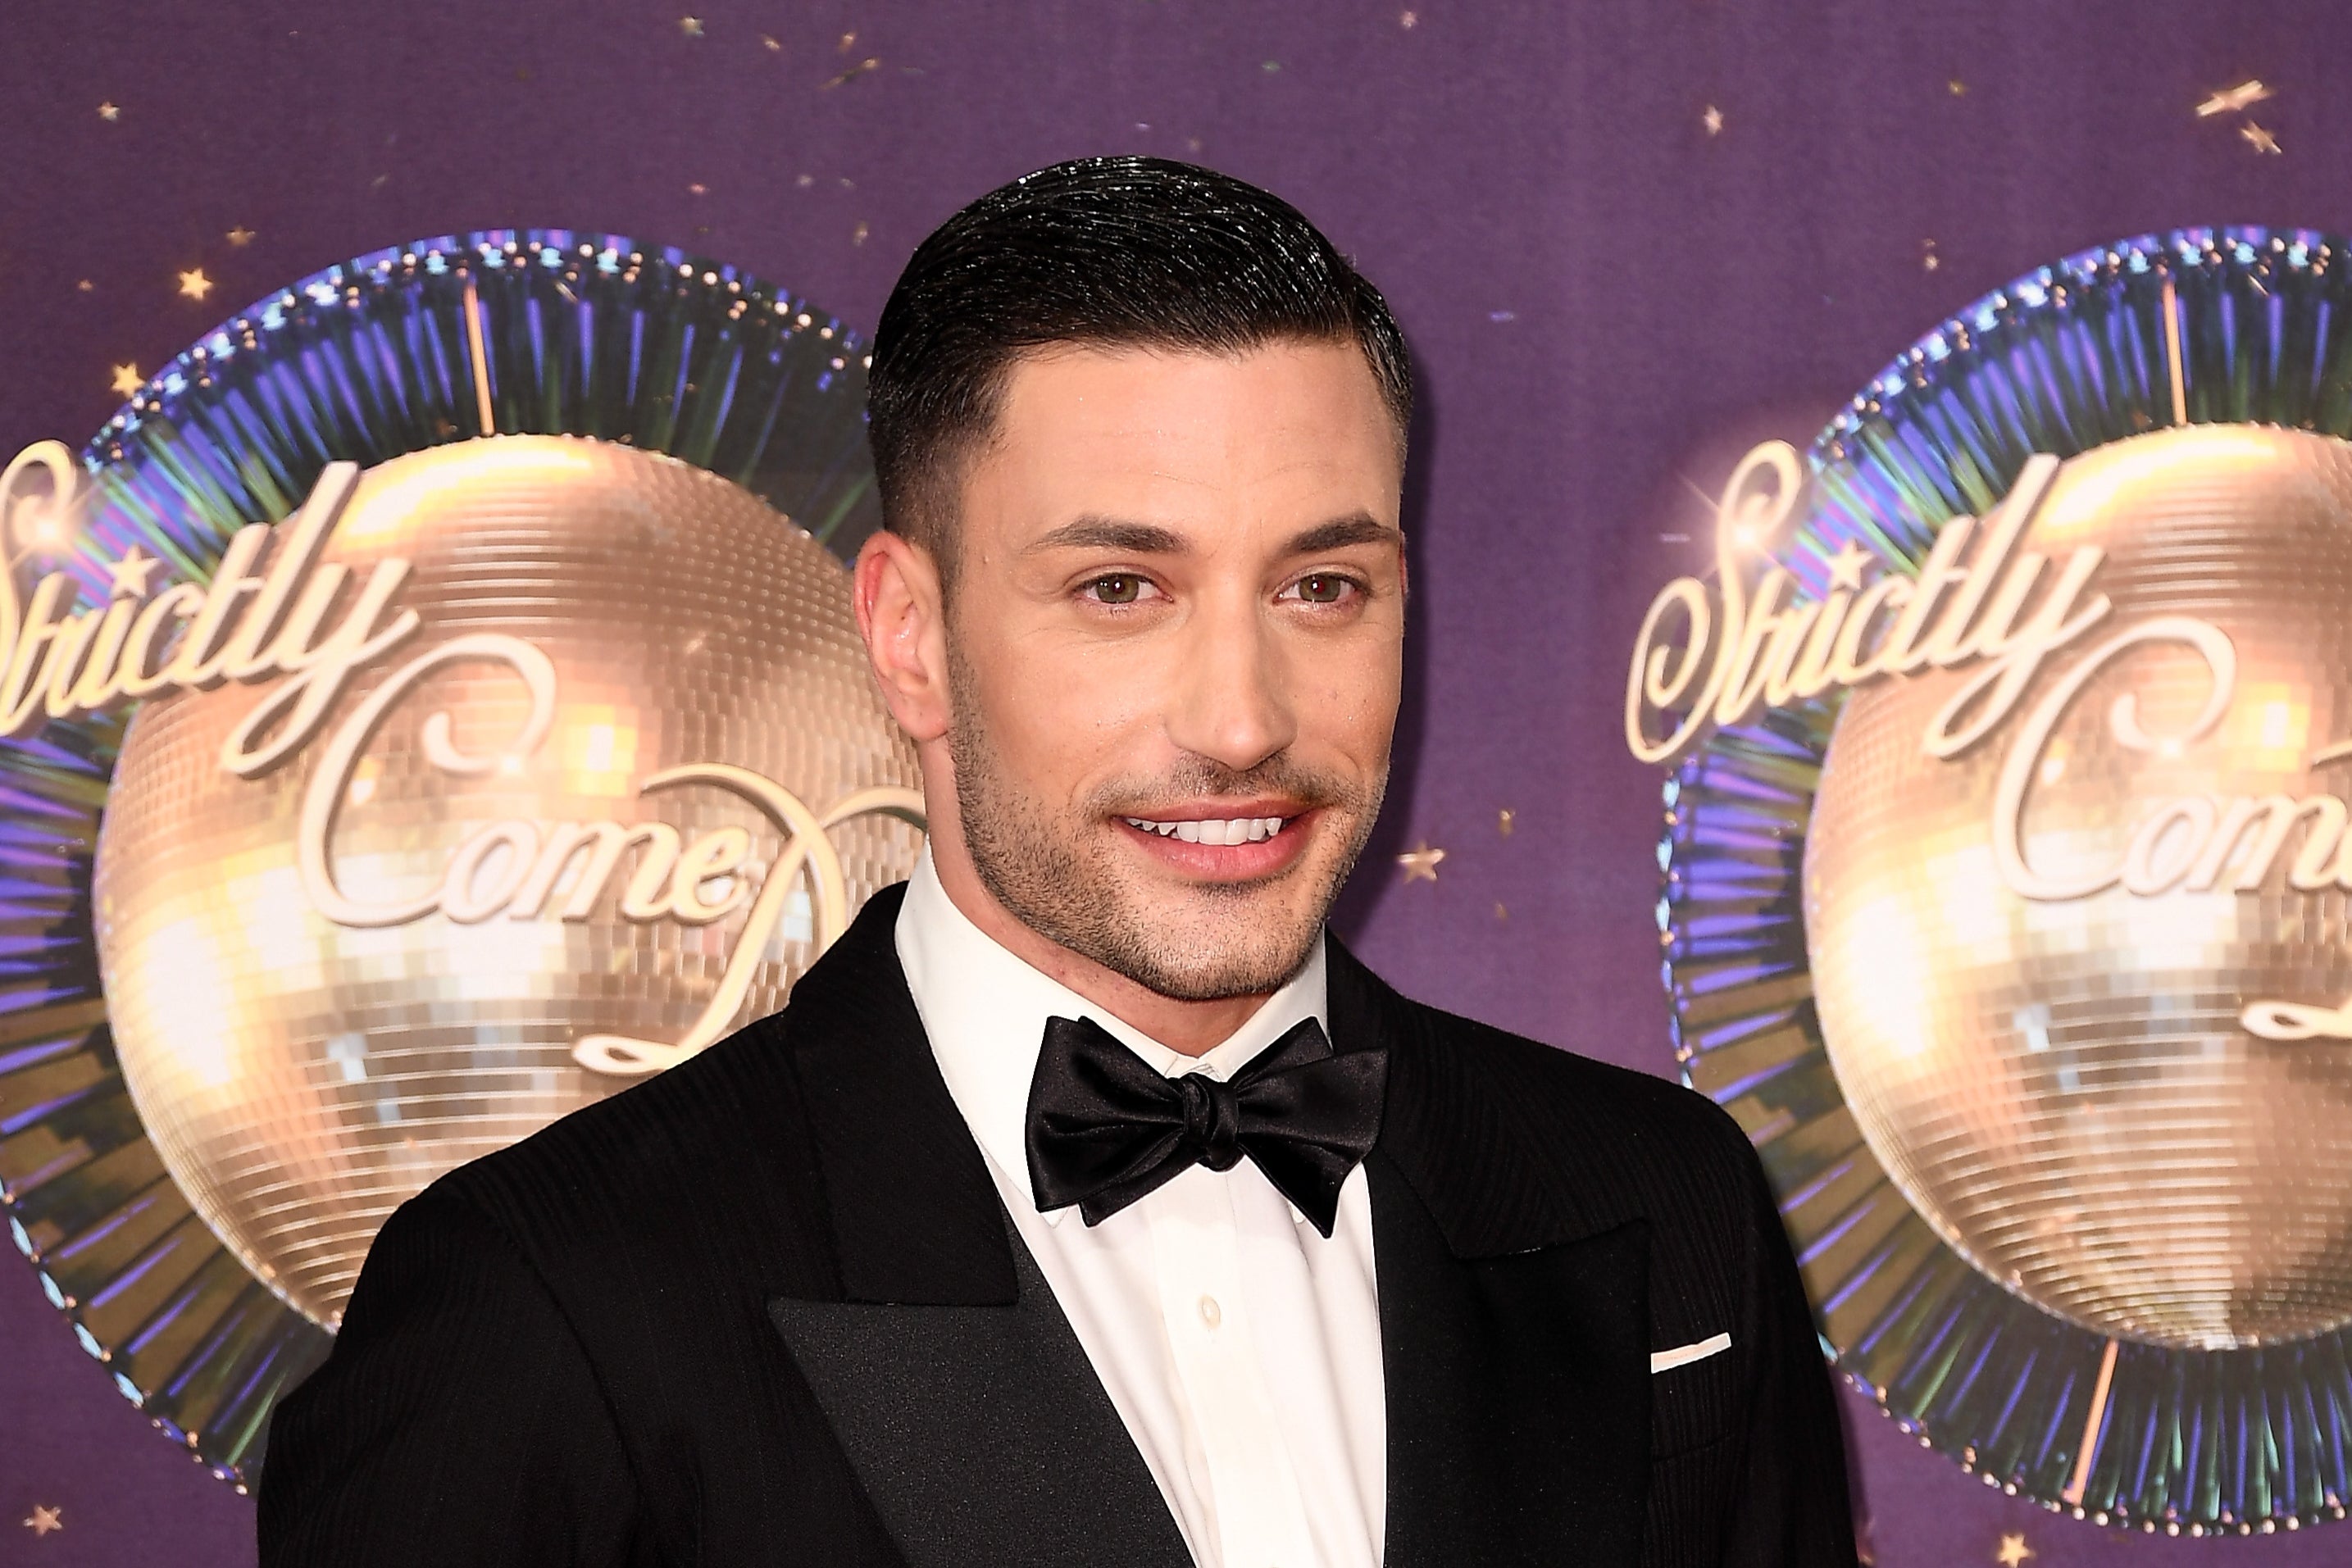 giovanni pernice, strictly come dancing, giovanni pernice makes first statement after strictly come dancing exit